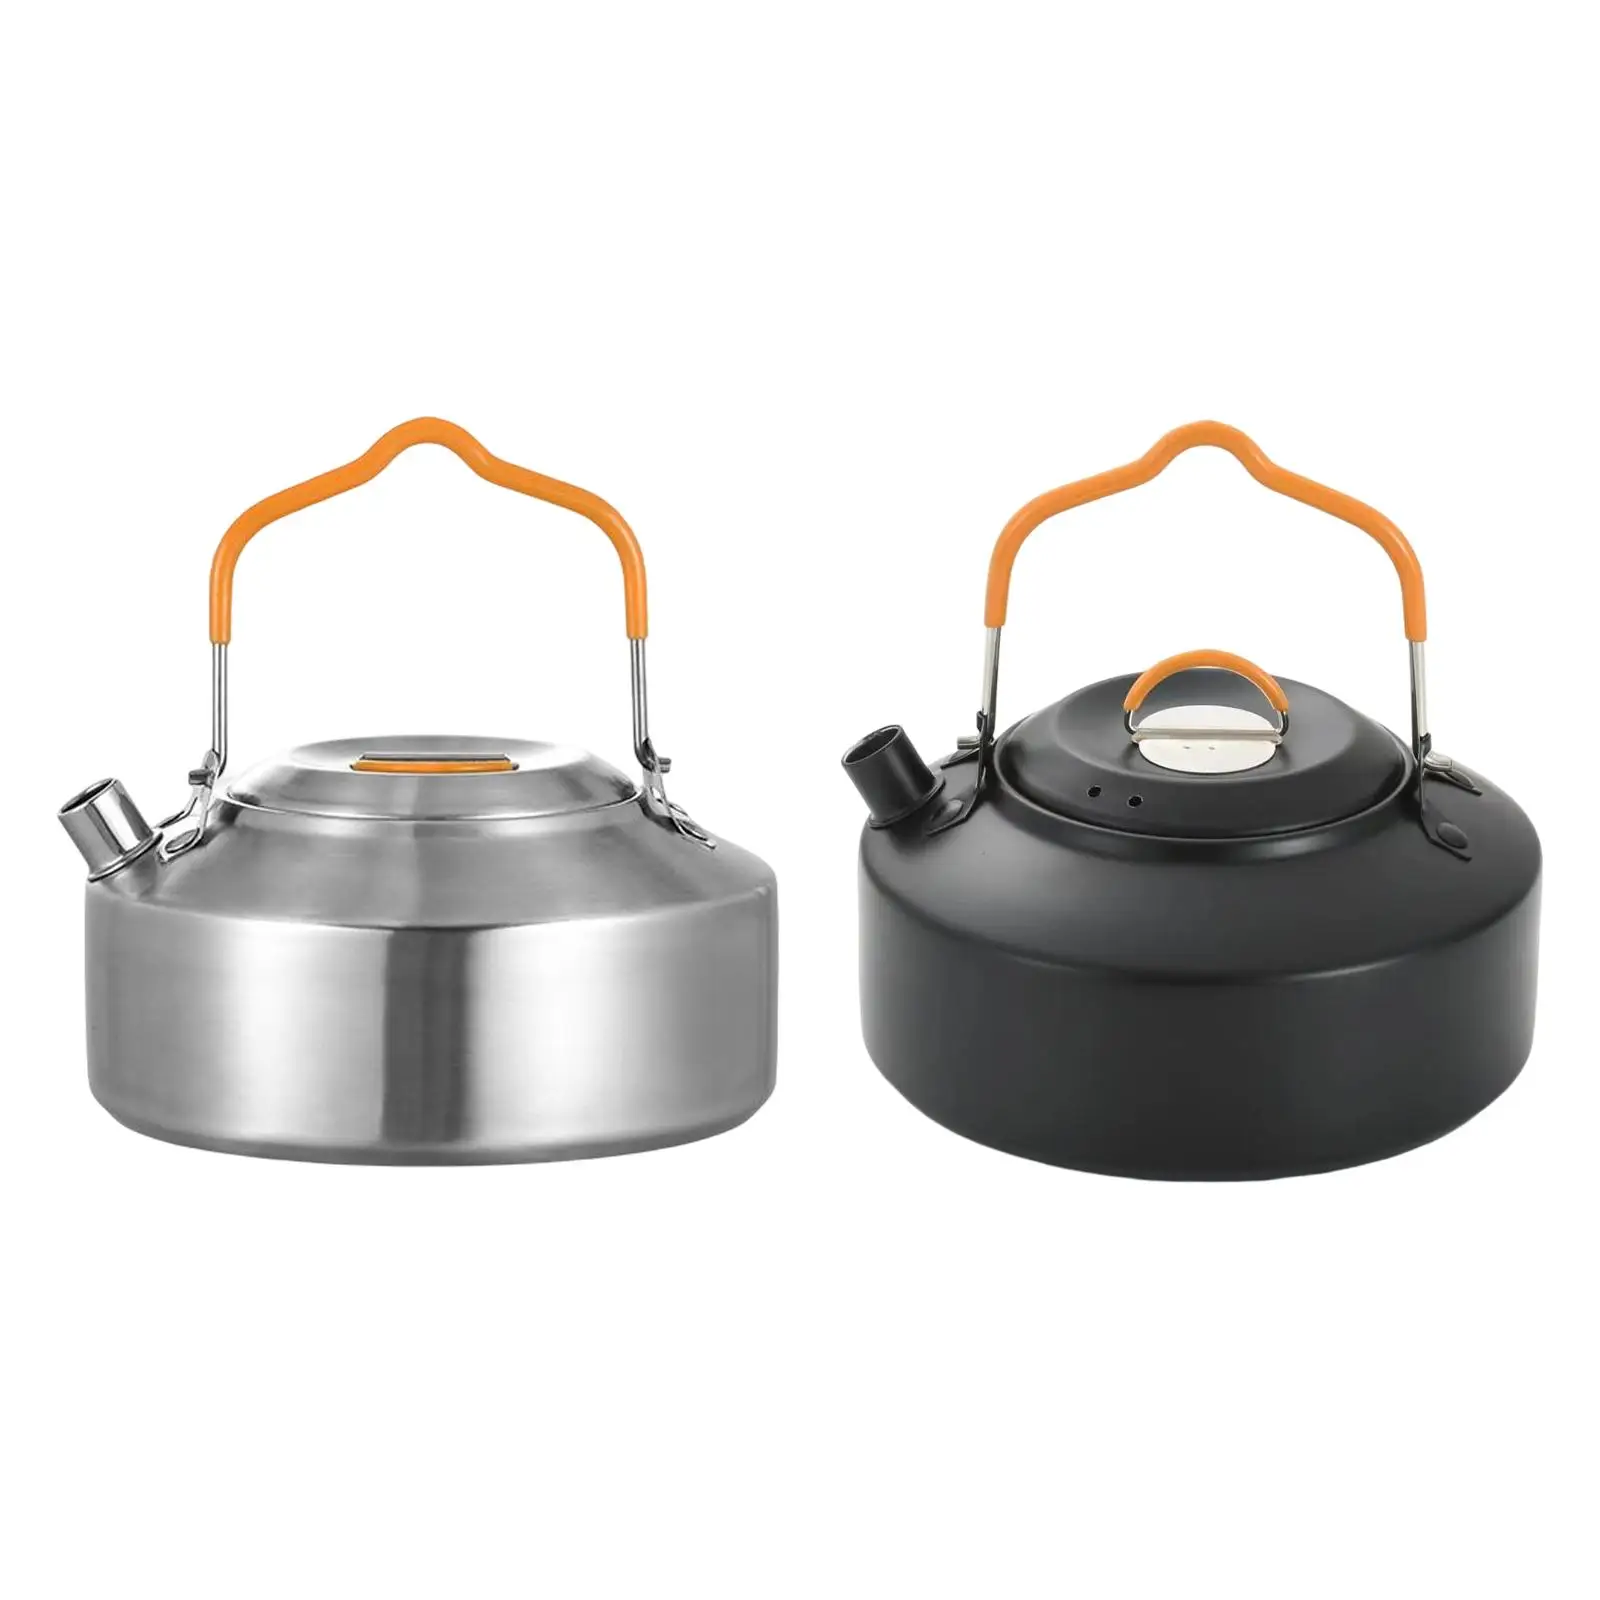 Outdoor Tea Coffee Pot Teapot Teakettle Campfire Camping Kettle for Fishing